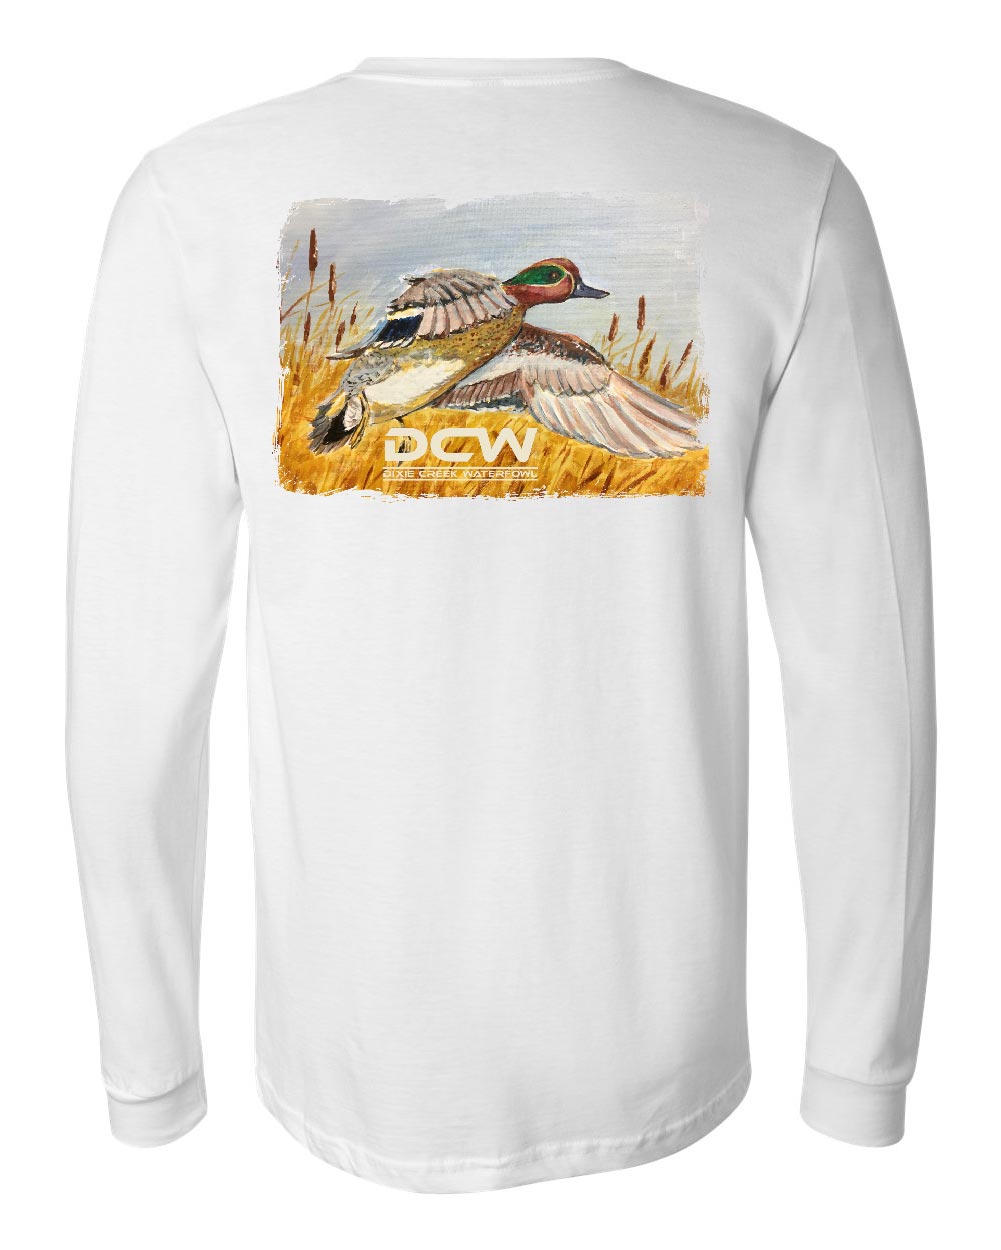 Green Wing Express - White Long Sleeve